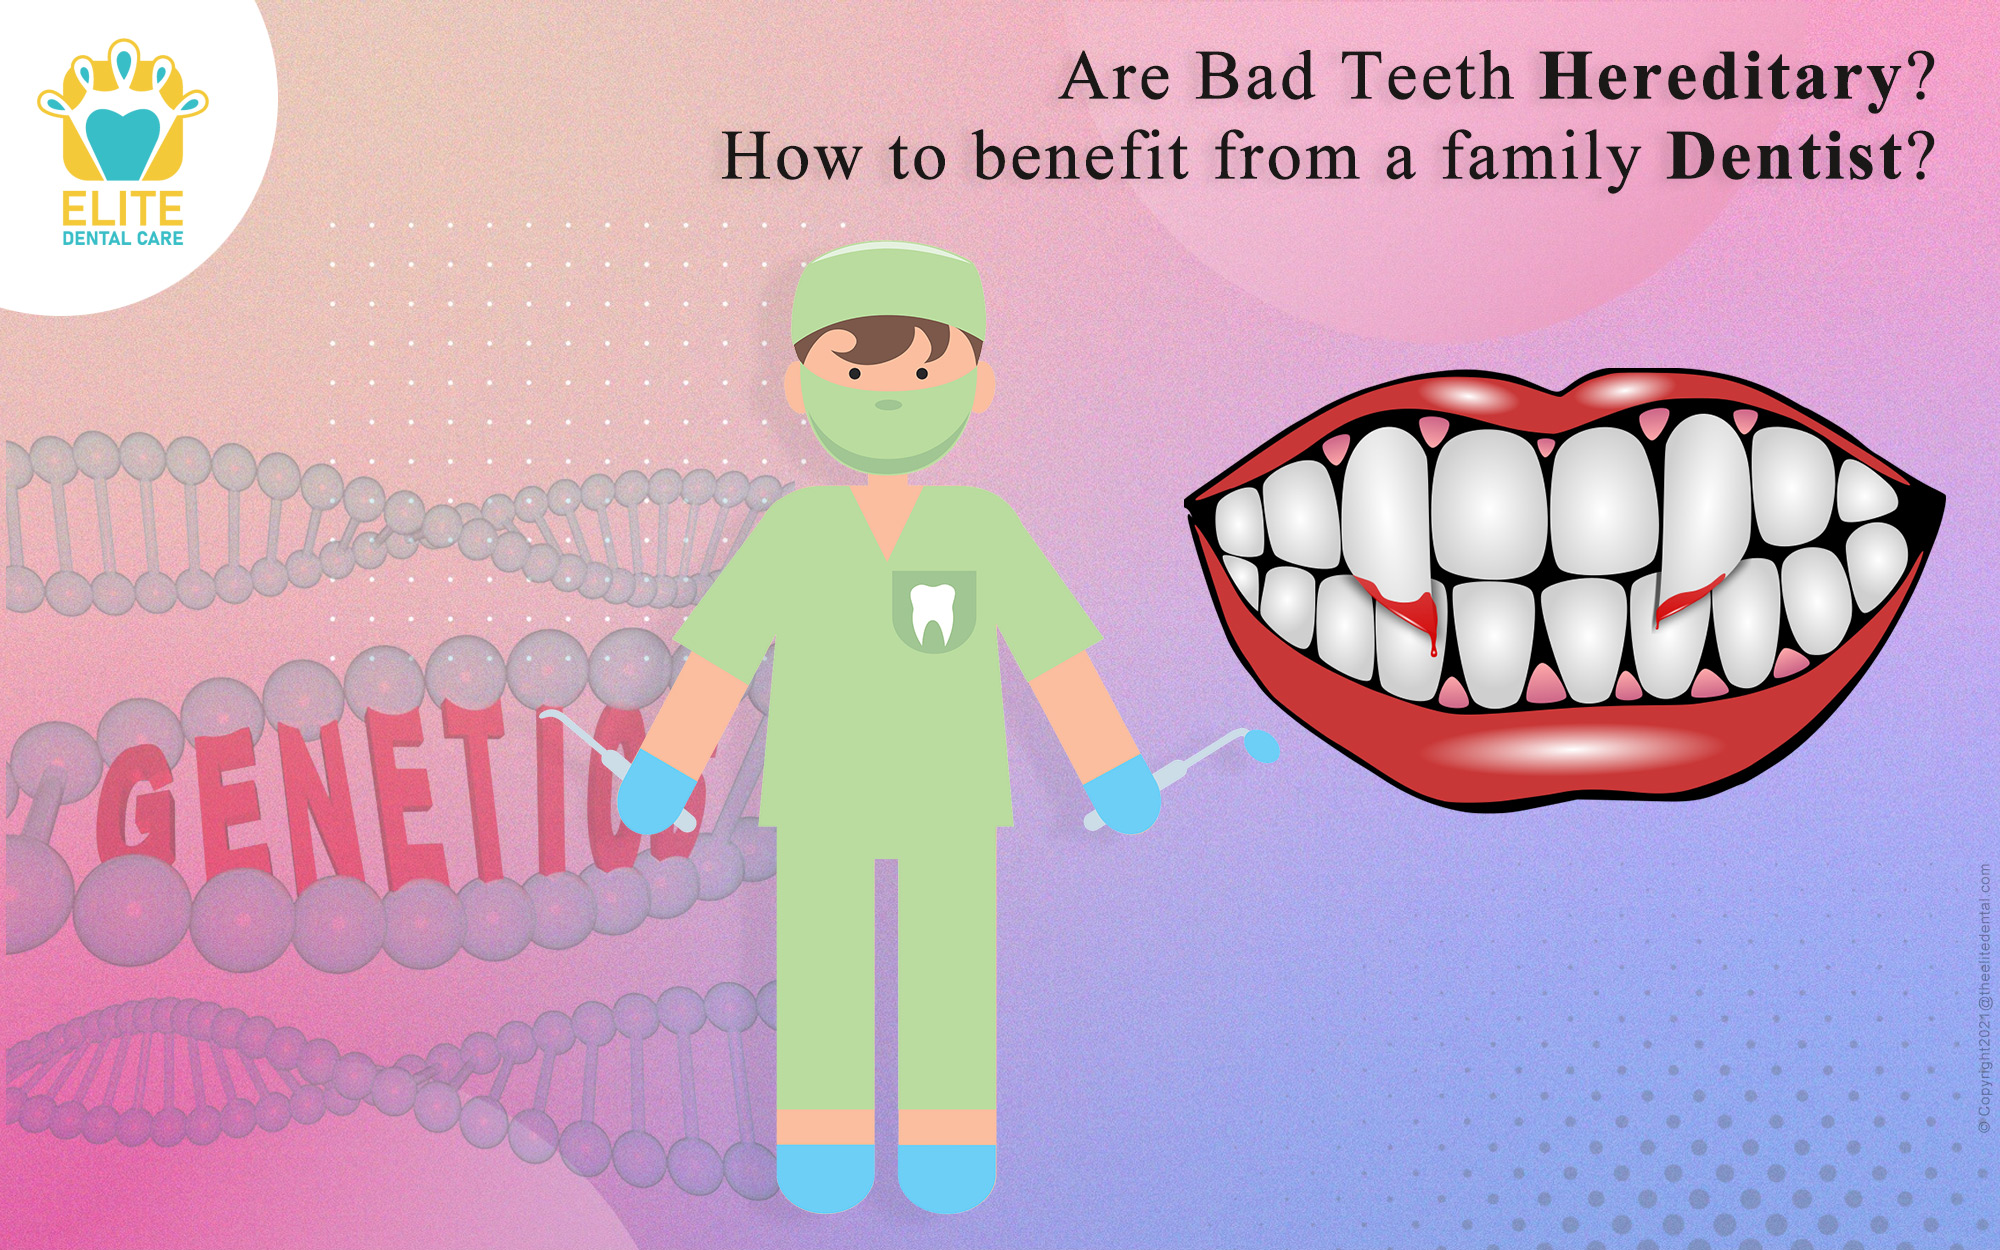 Are Bad Teeth Hereditary? How to benefit from a family Dentist?